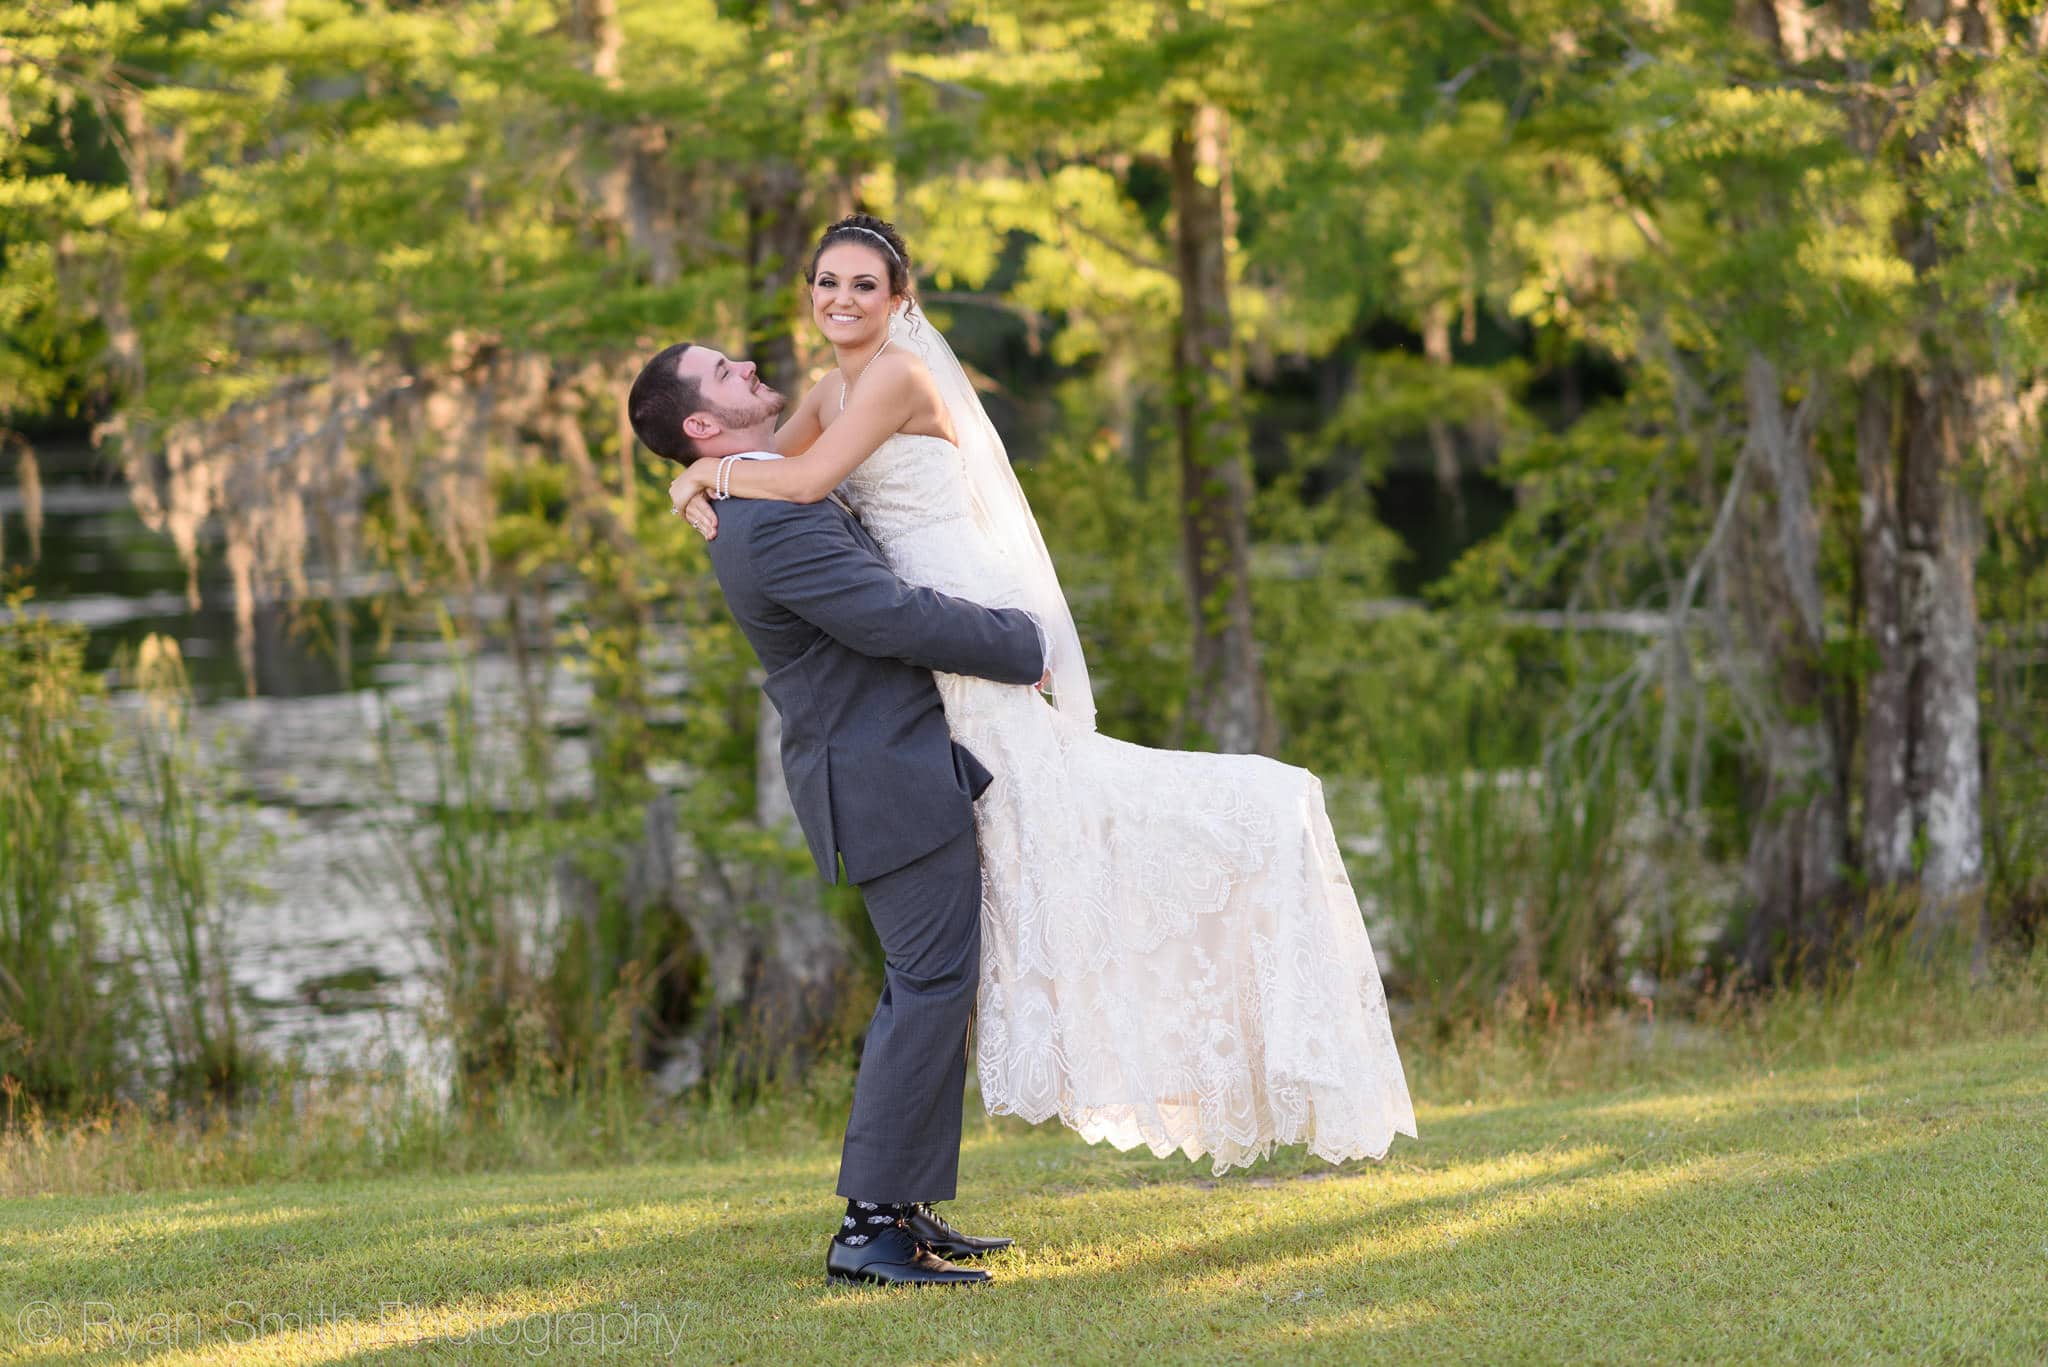 Groom lifting bride into the air - Upper Mill Plantation